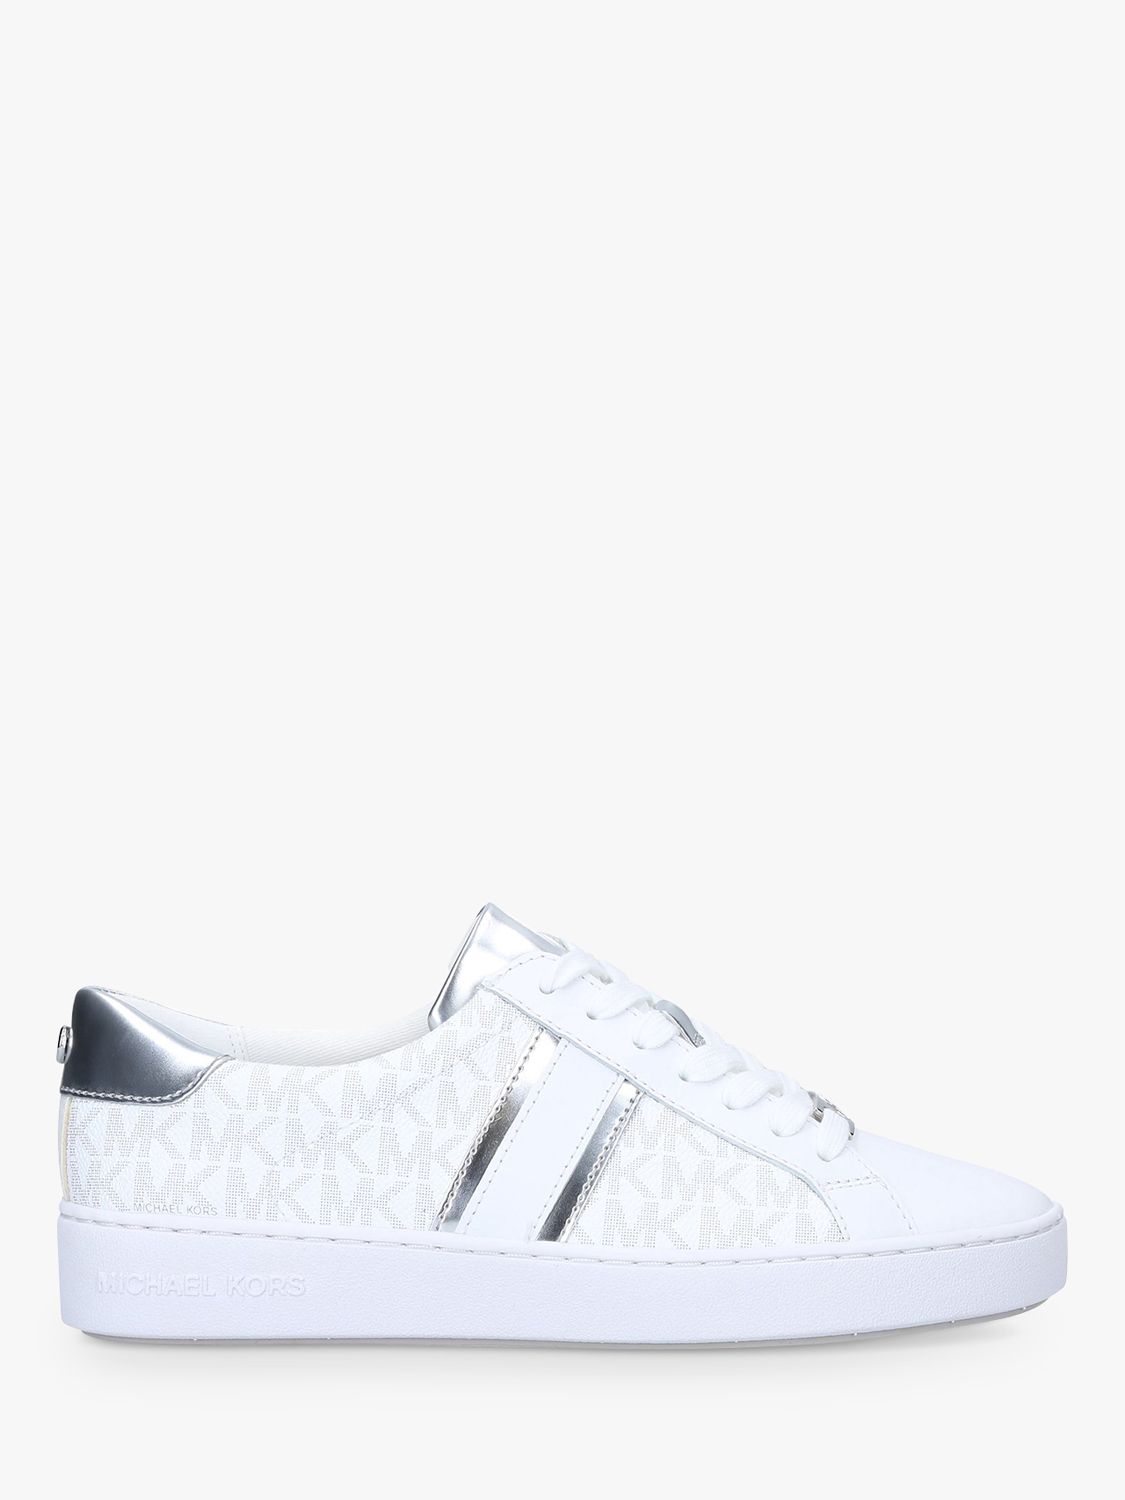 MICHAEL Michael Kors Irving Leather Striped Trainers, White